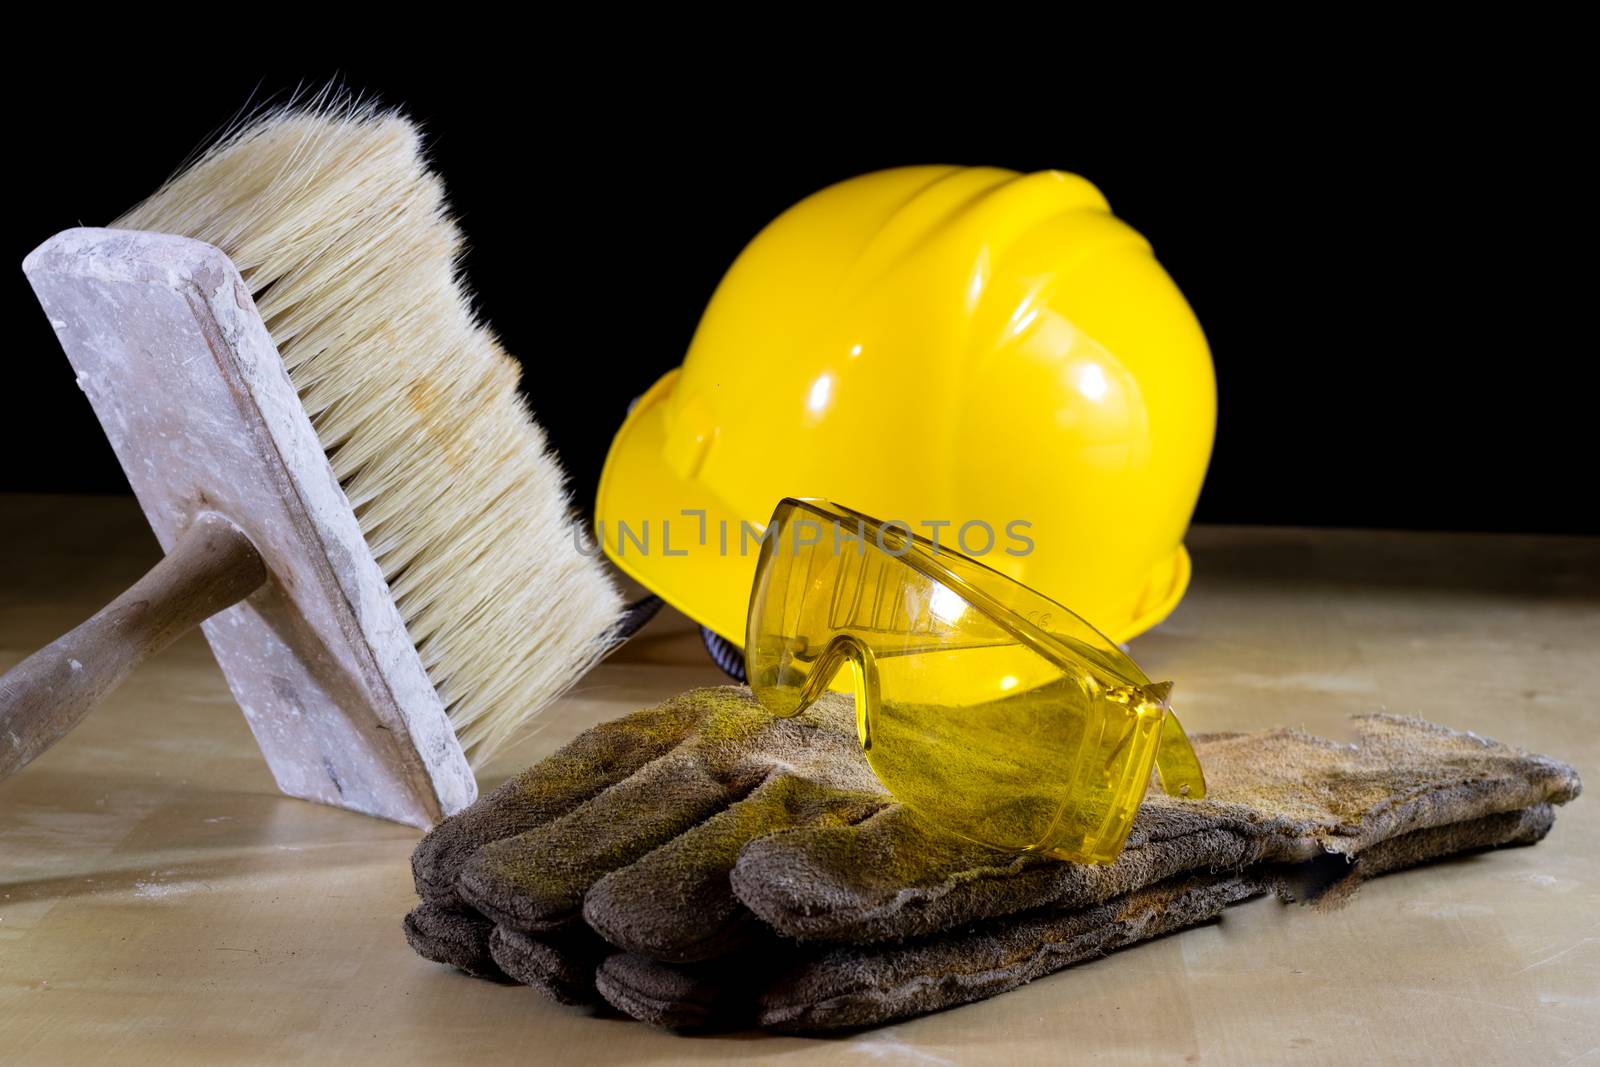 Safety glasses, helmet, work gloves and brush. Tools on a wooden table. Black background.